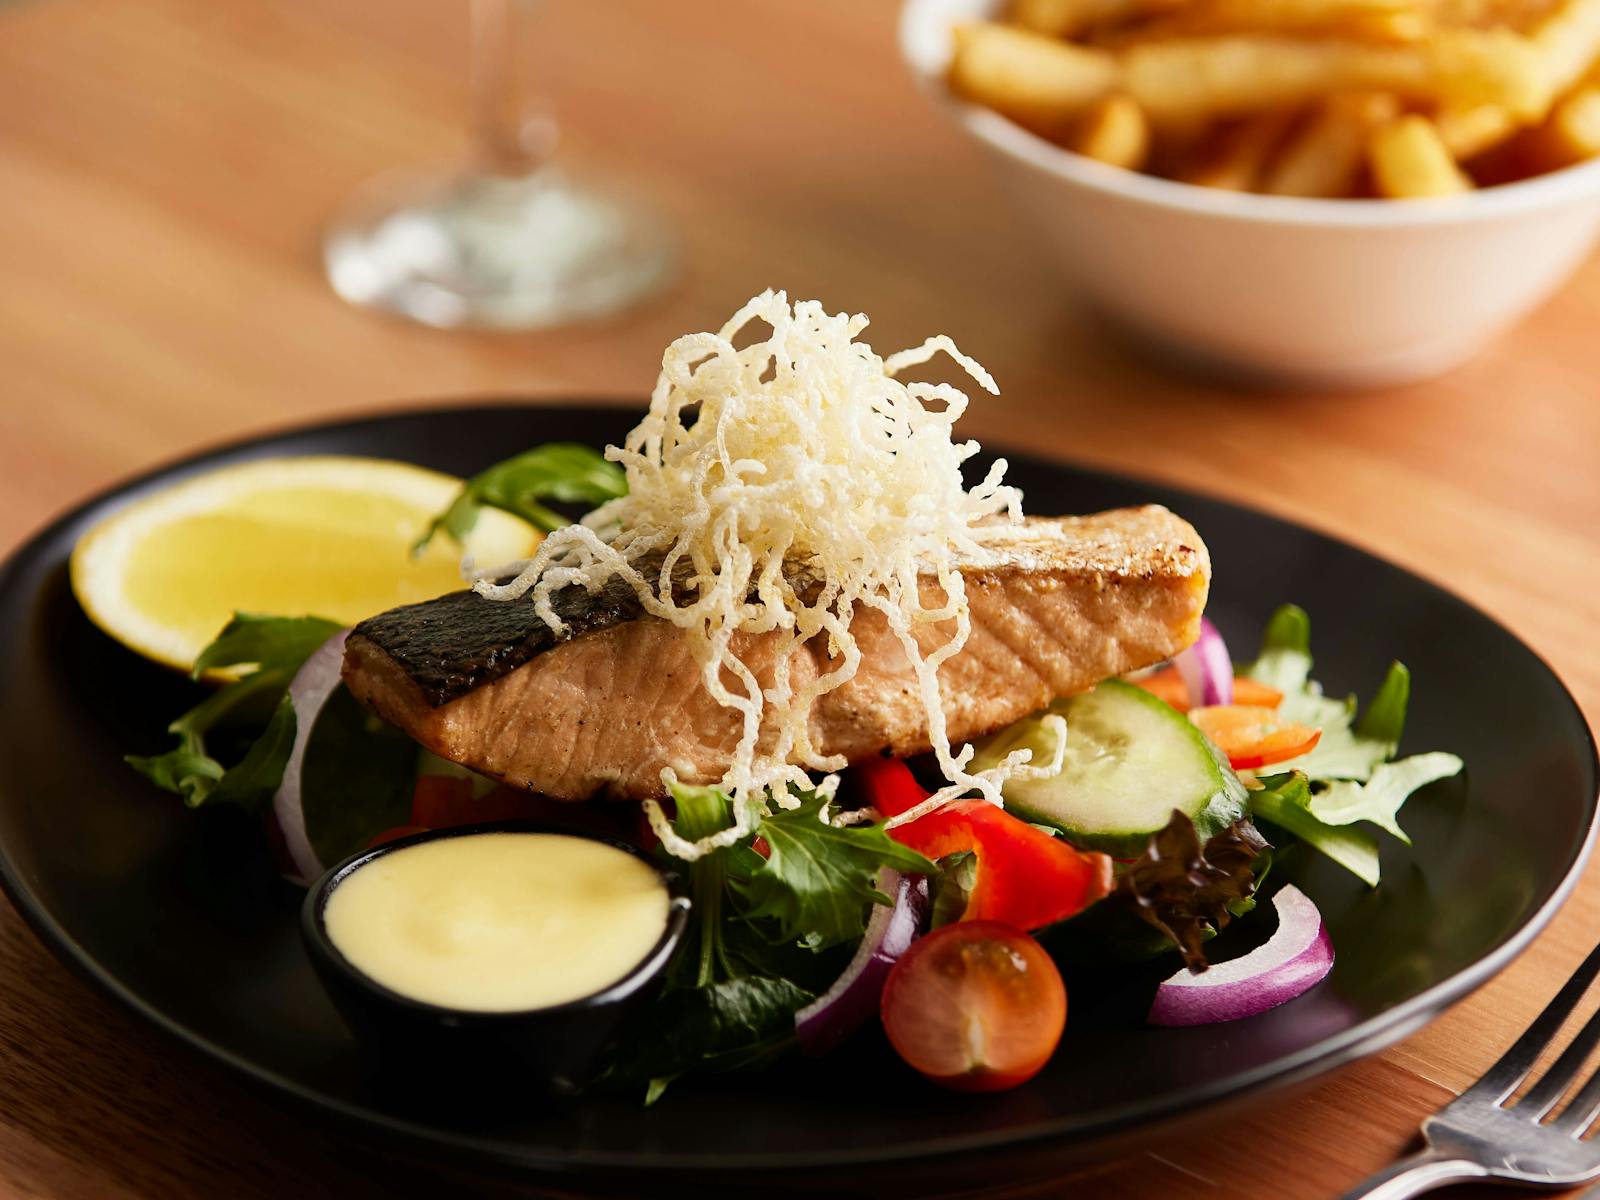 A fish meal on a plate with salad and a bowl of chips in the background